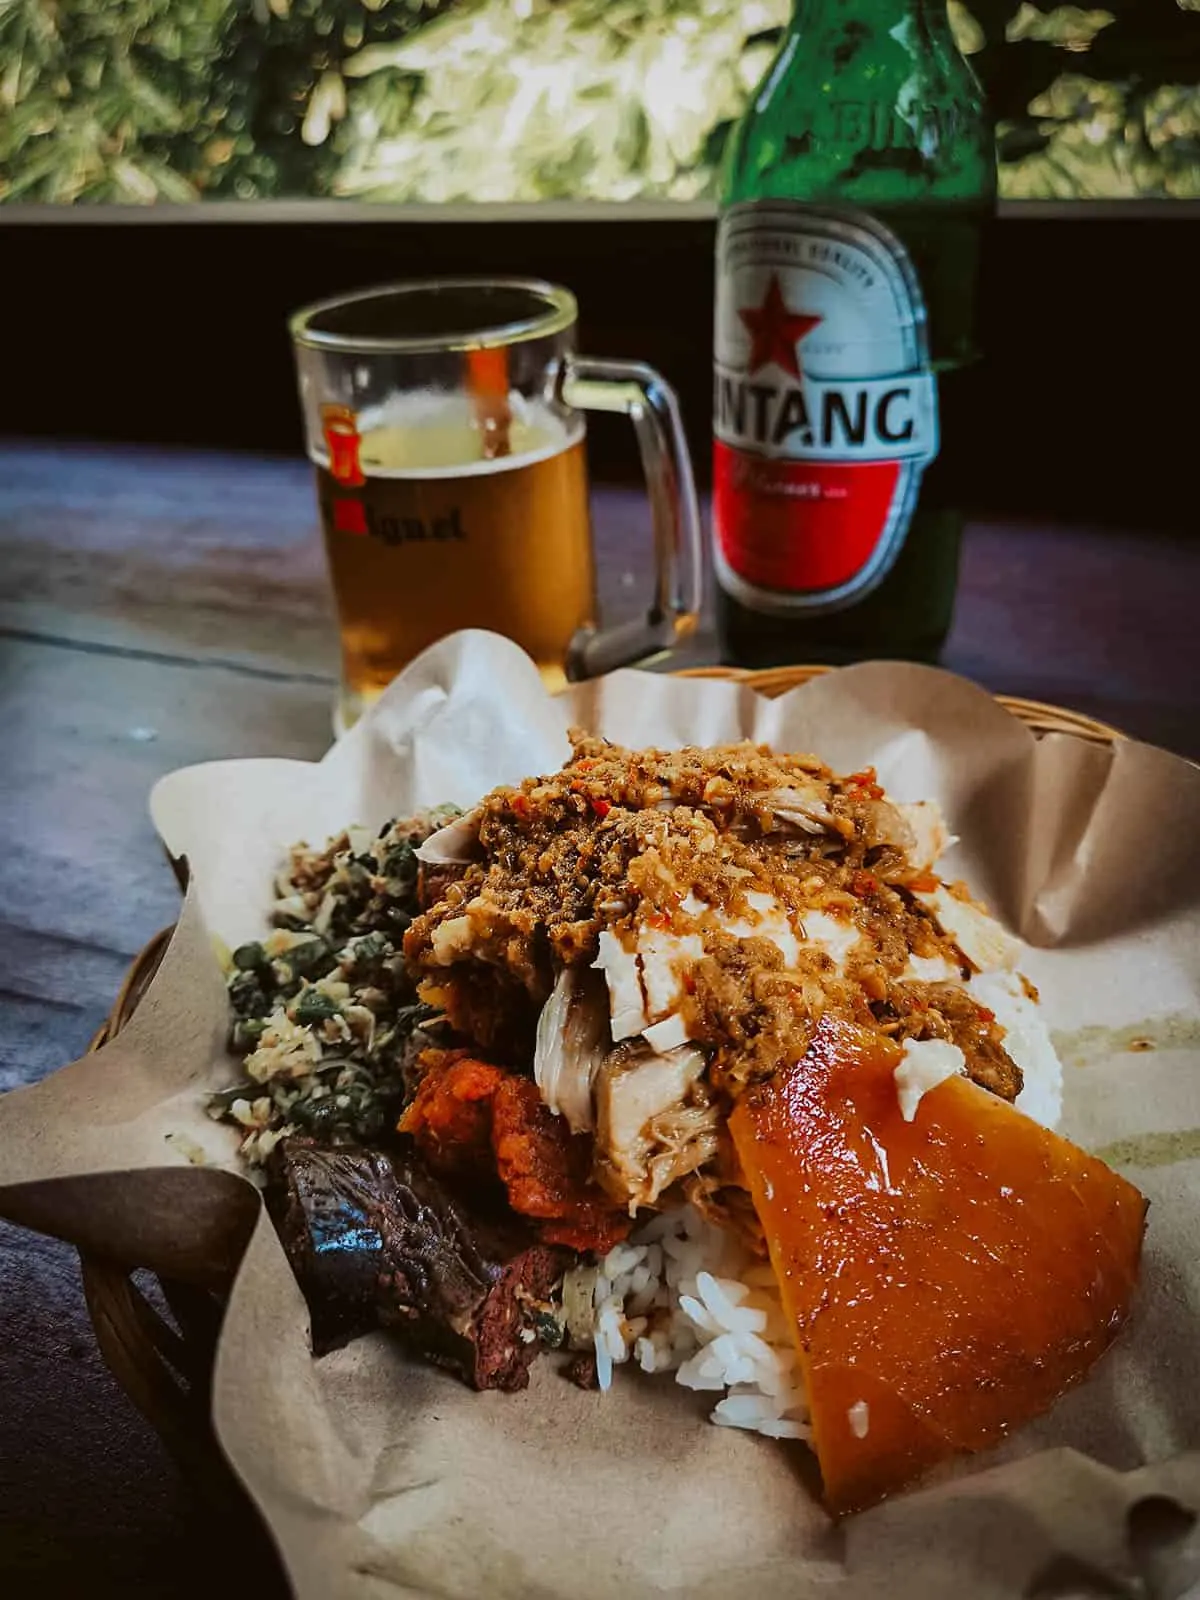 Roast pig and Bintang beer at a famous restaurant in Bali